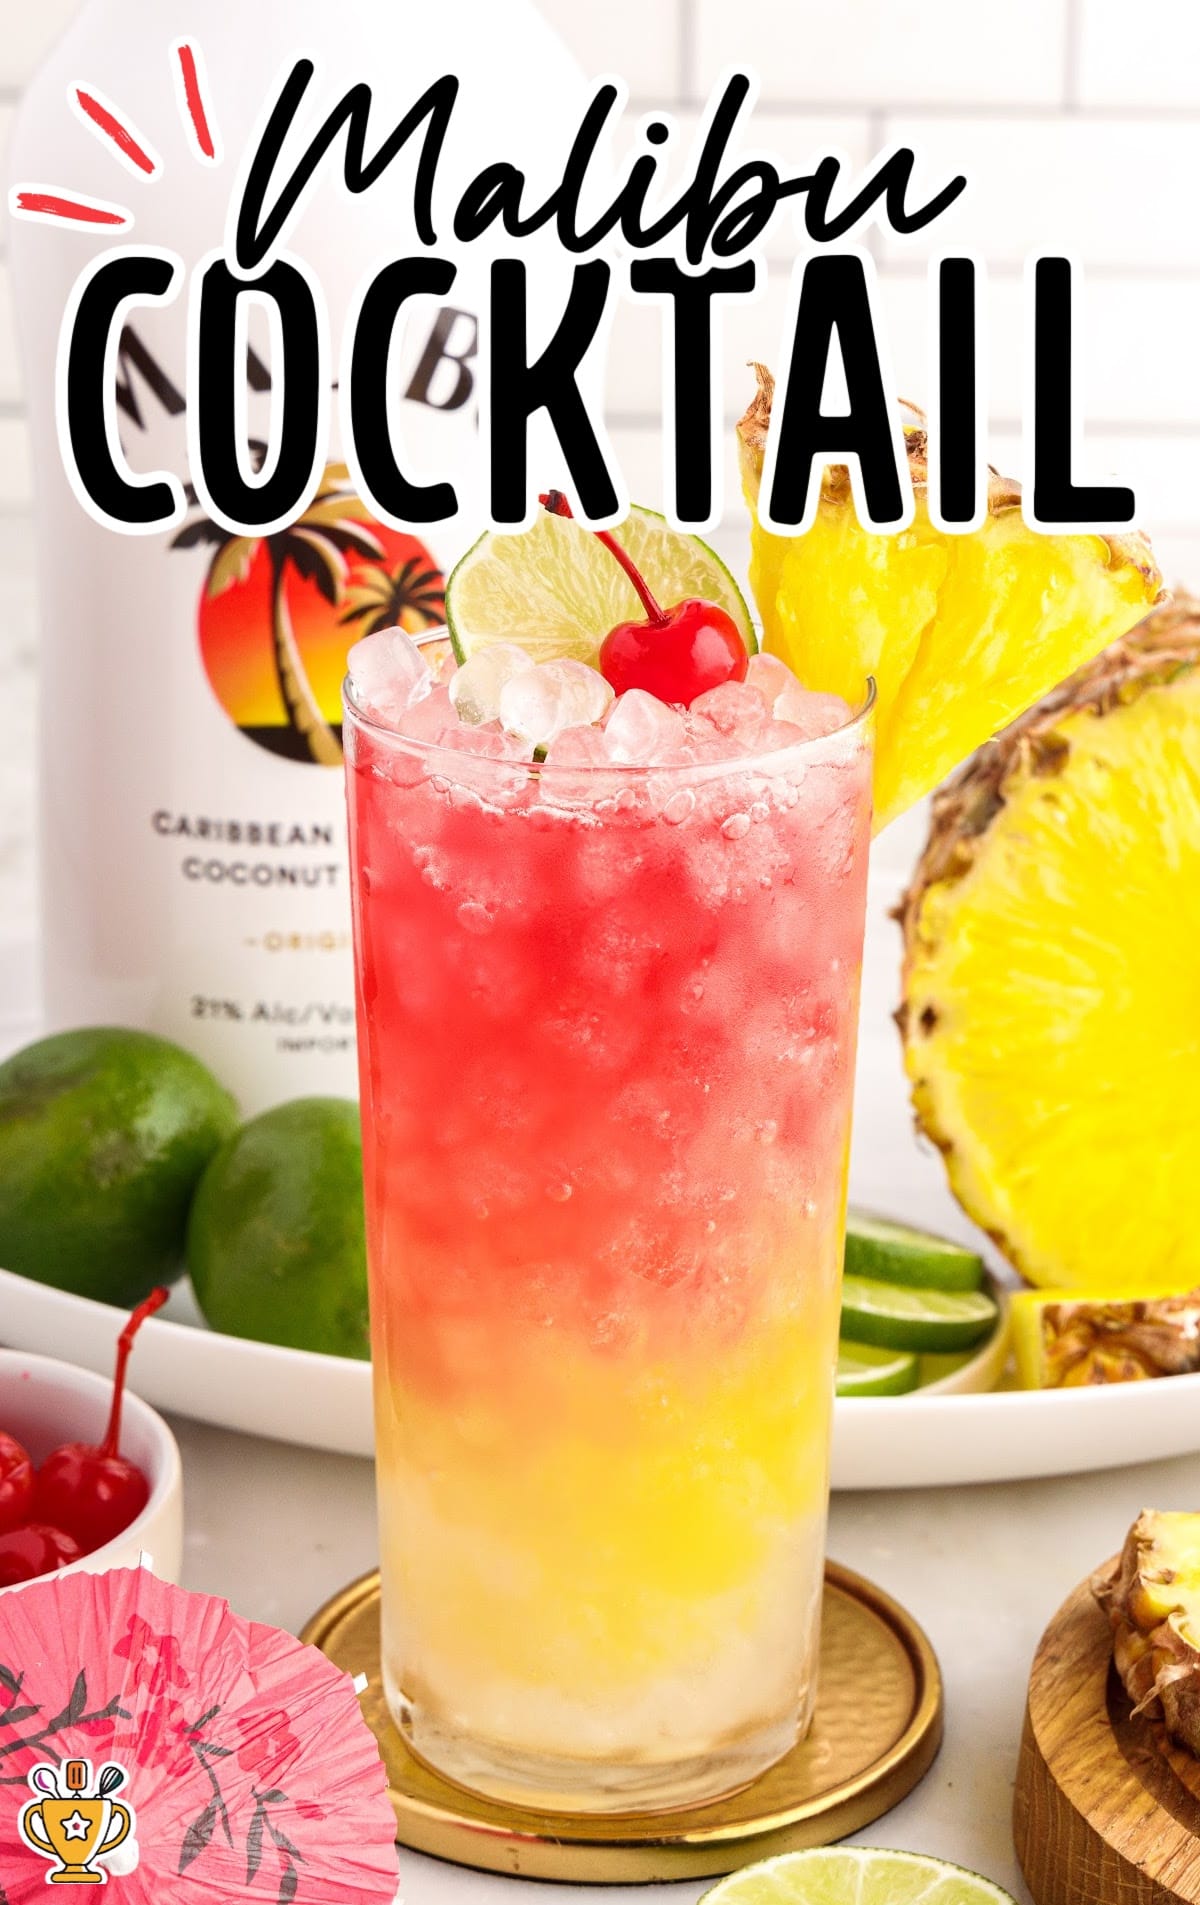  Malibu Cocktail garnished with a cherry, sliced pineapple, and a slice of lime